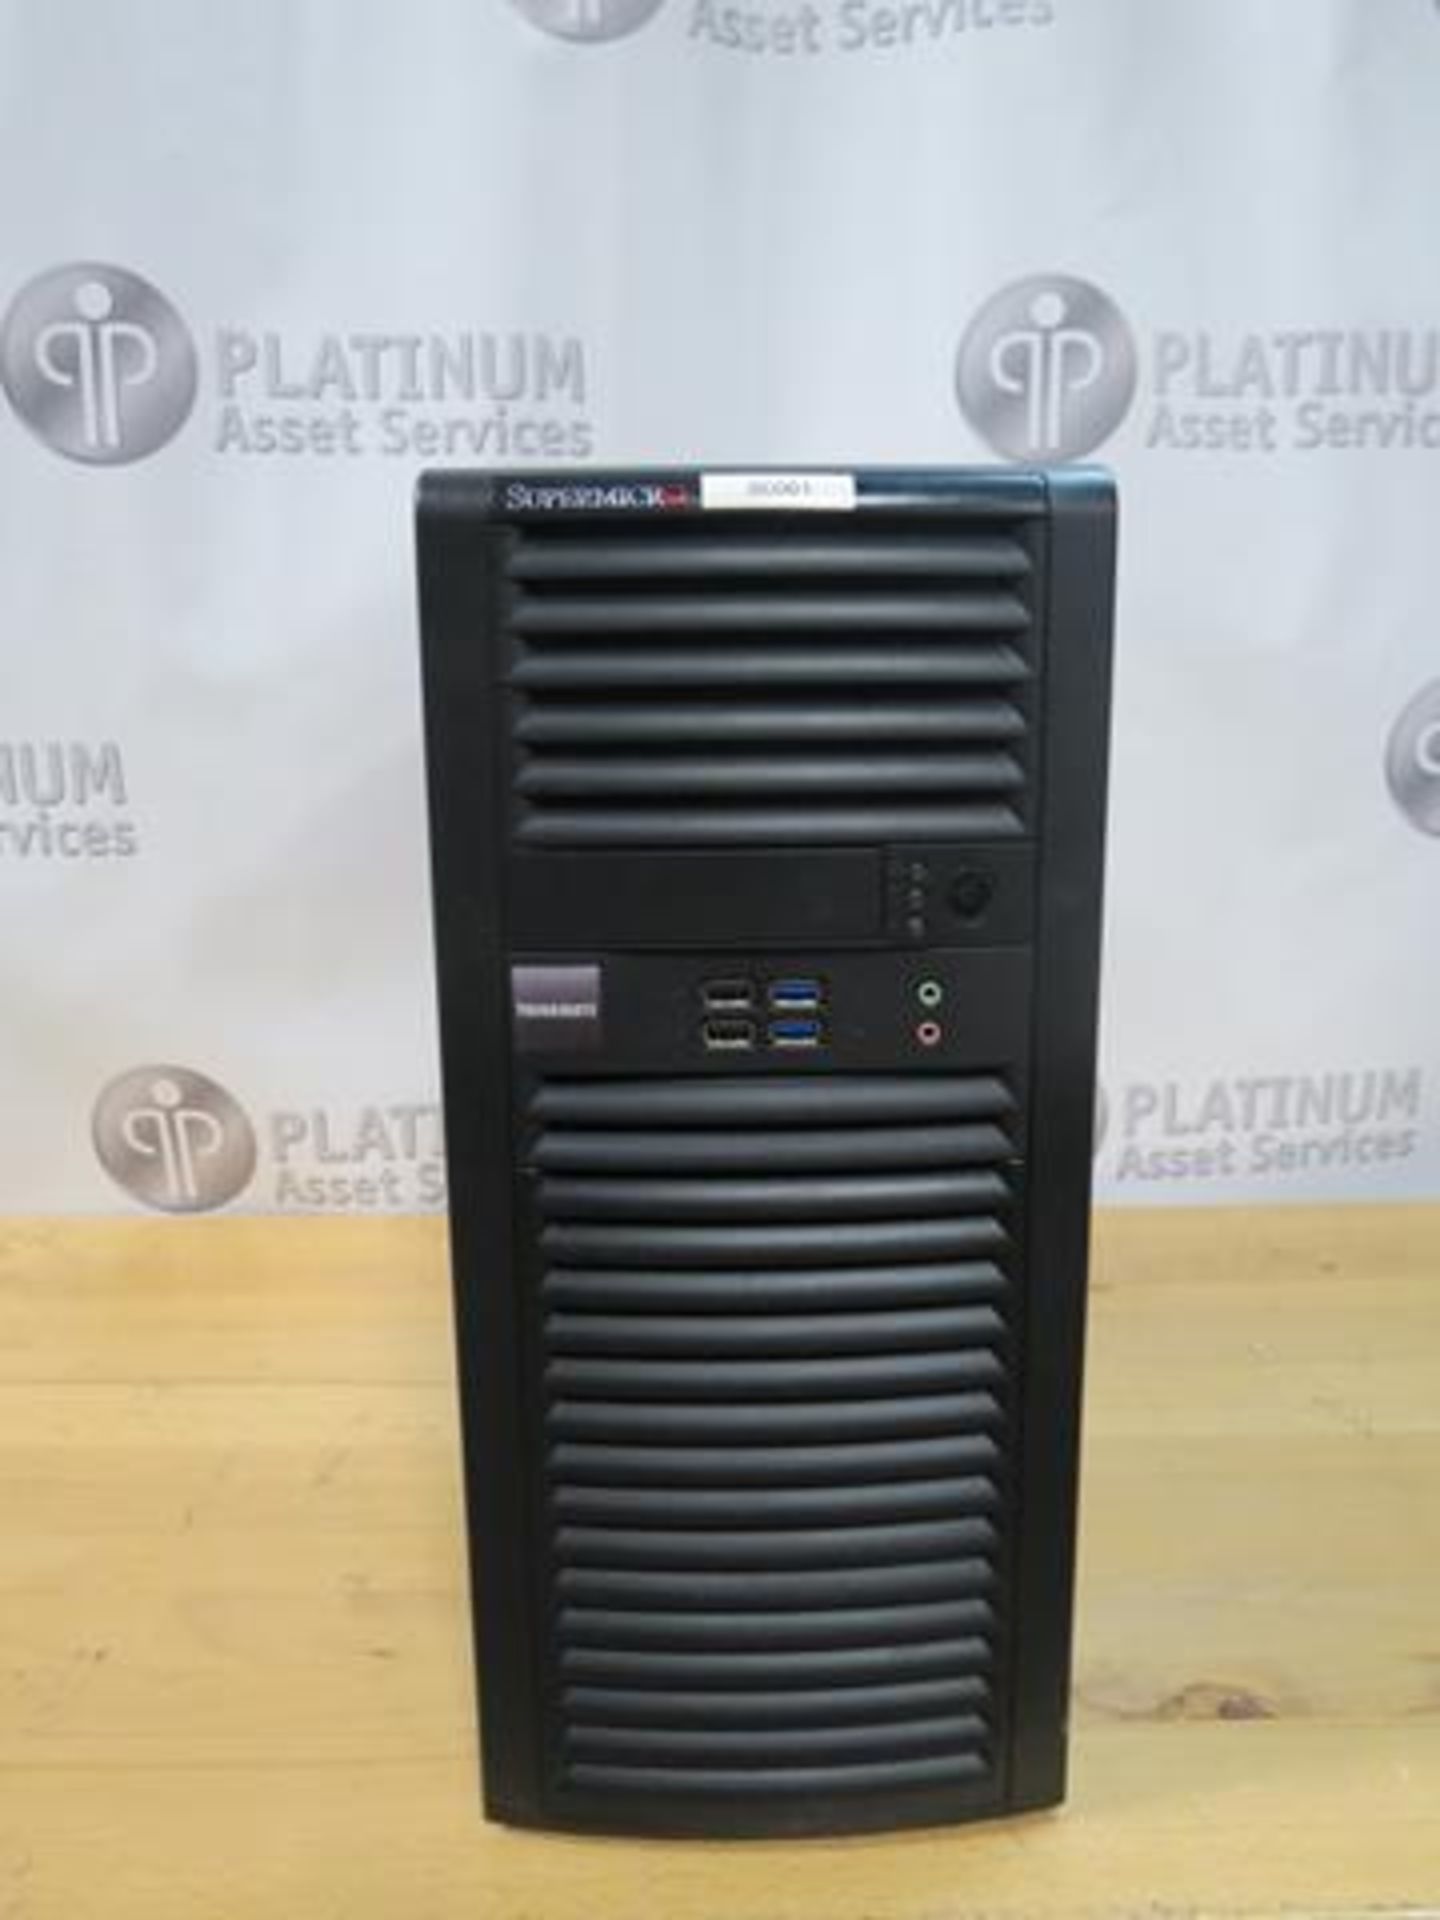 THINKMATE, SUPERMICRO, TOWER WORKSTATION (FUNCTIONALITY UNKNOWN) (TAG#212)